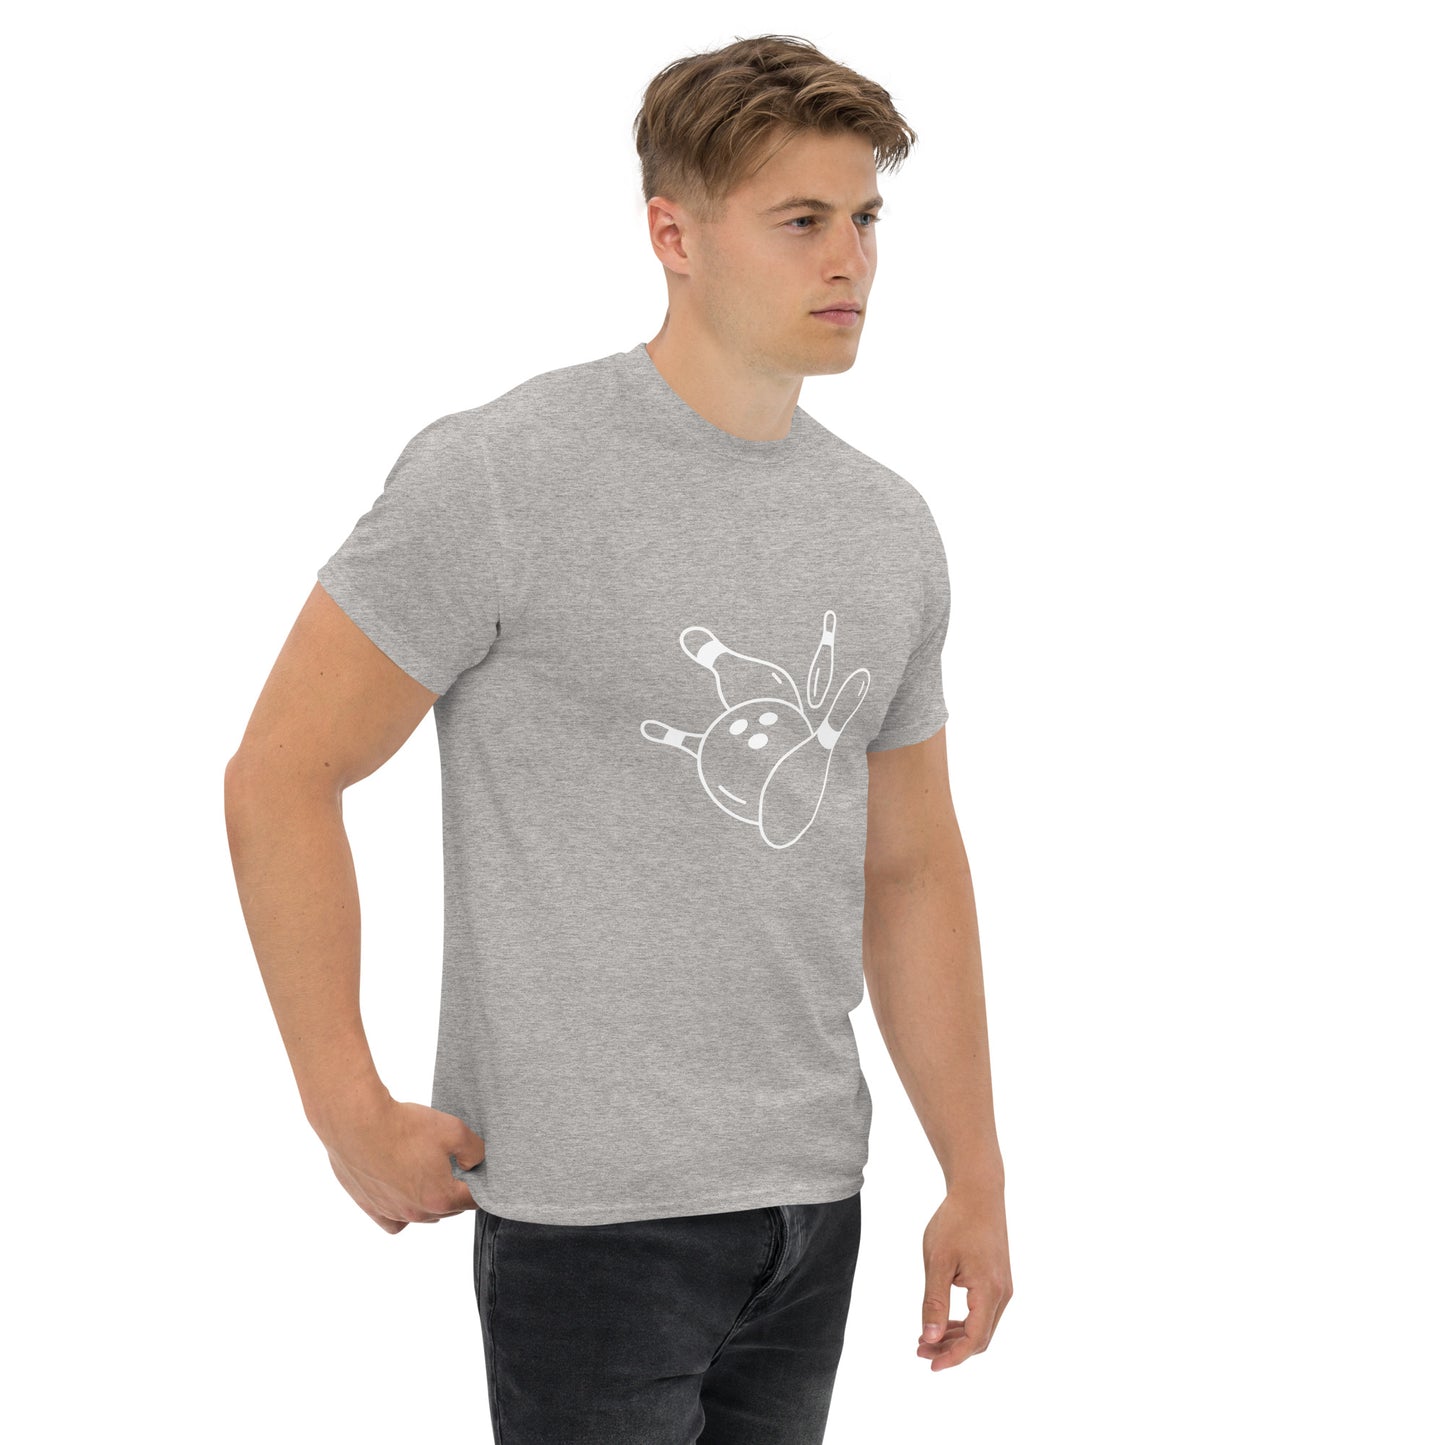 Bowling - Men's classic tee ~ Sharon Dawn Collection